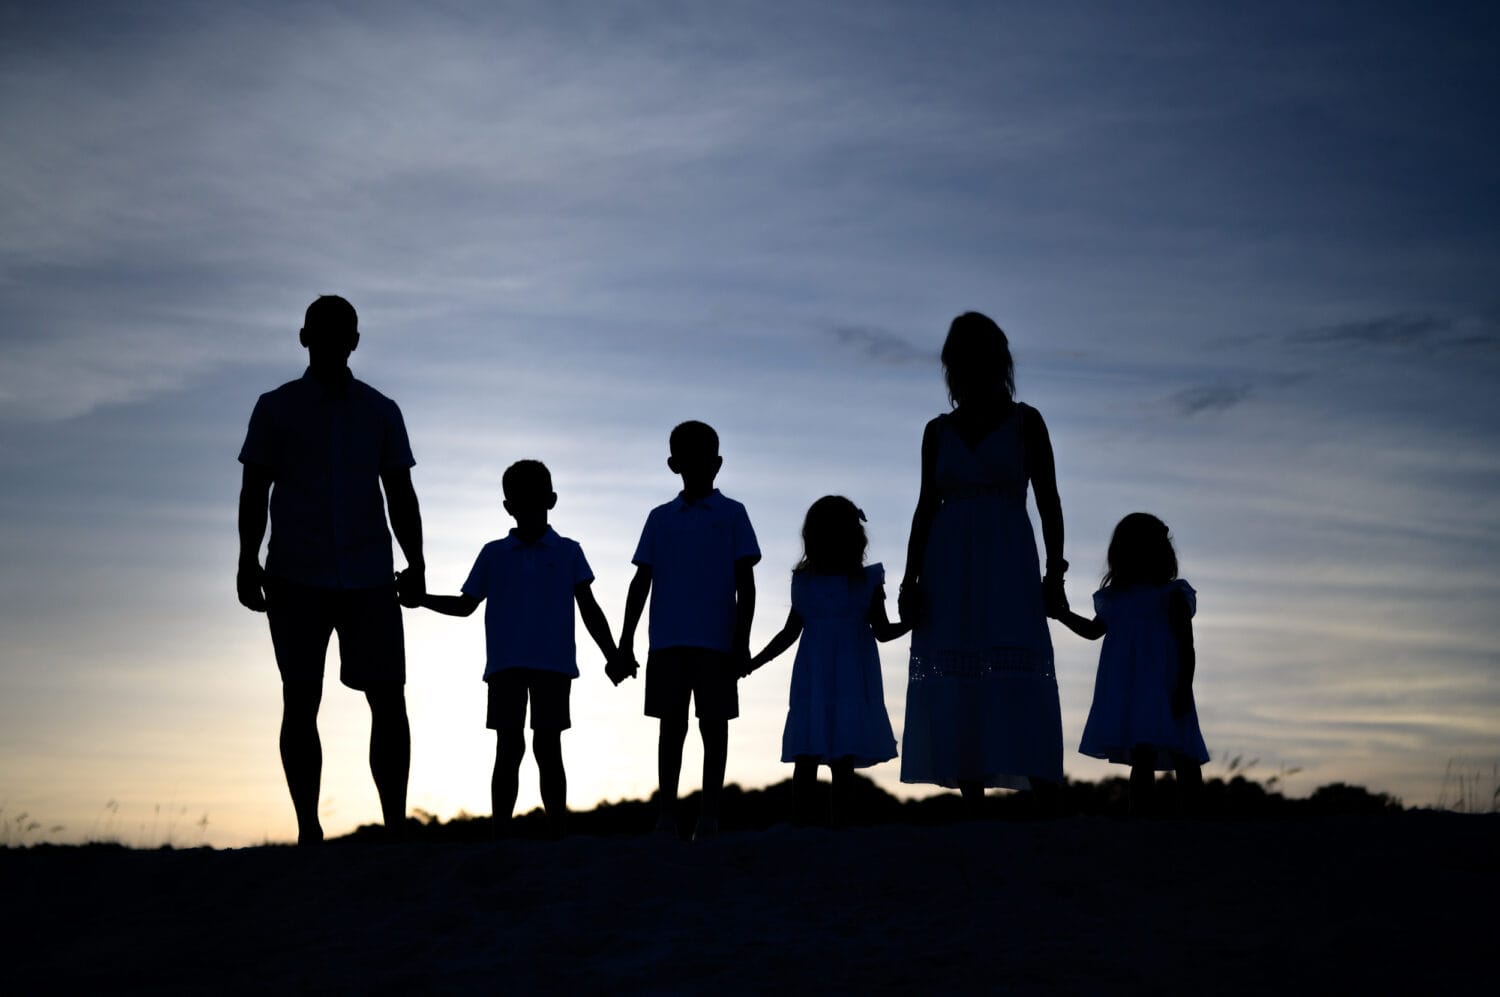 Silhouette of family by the ocean - Huntington Beach State Park